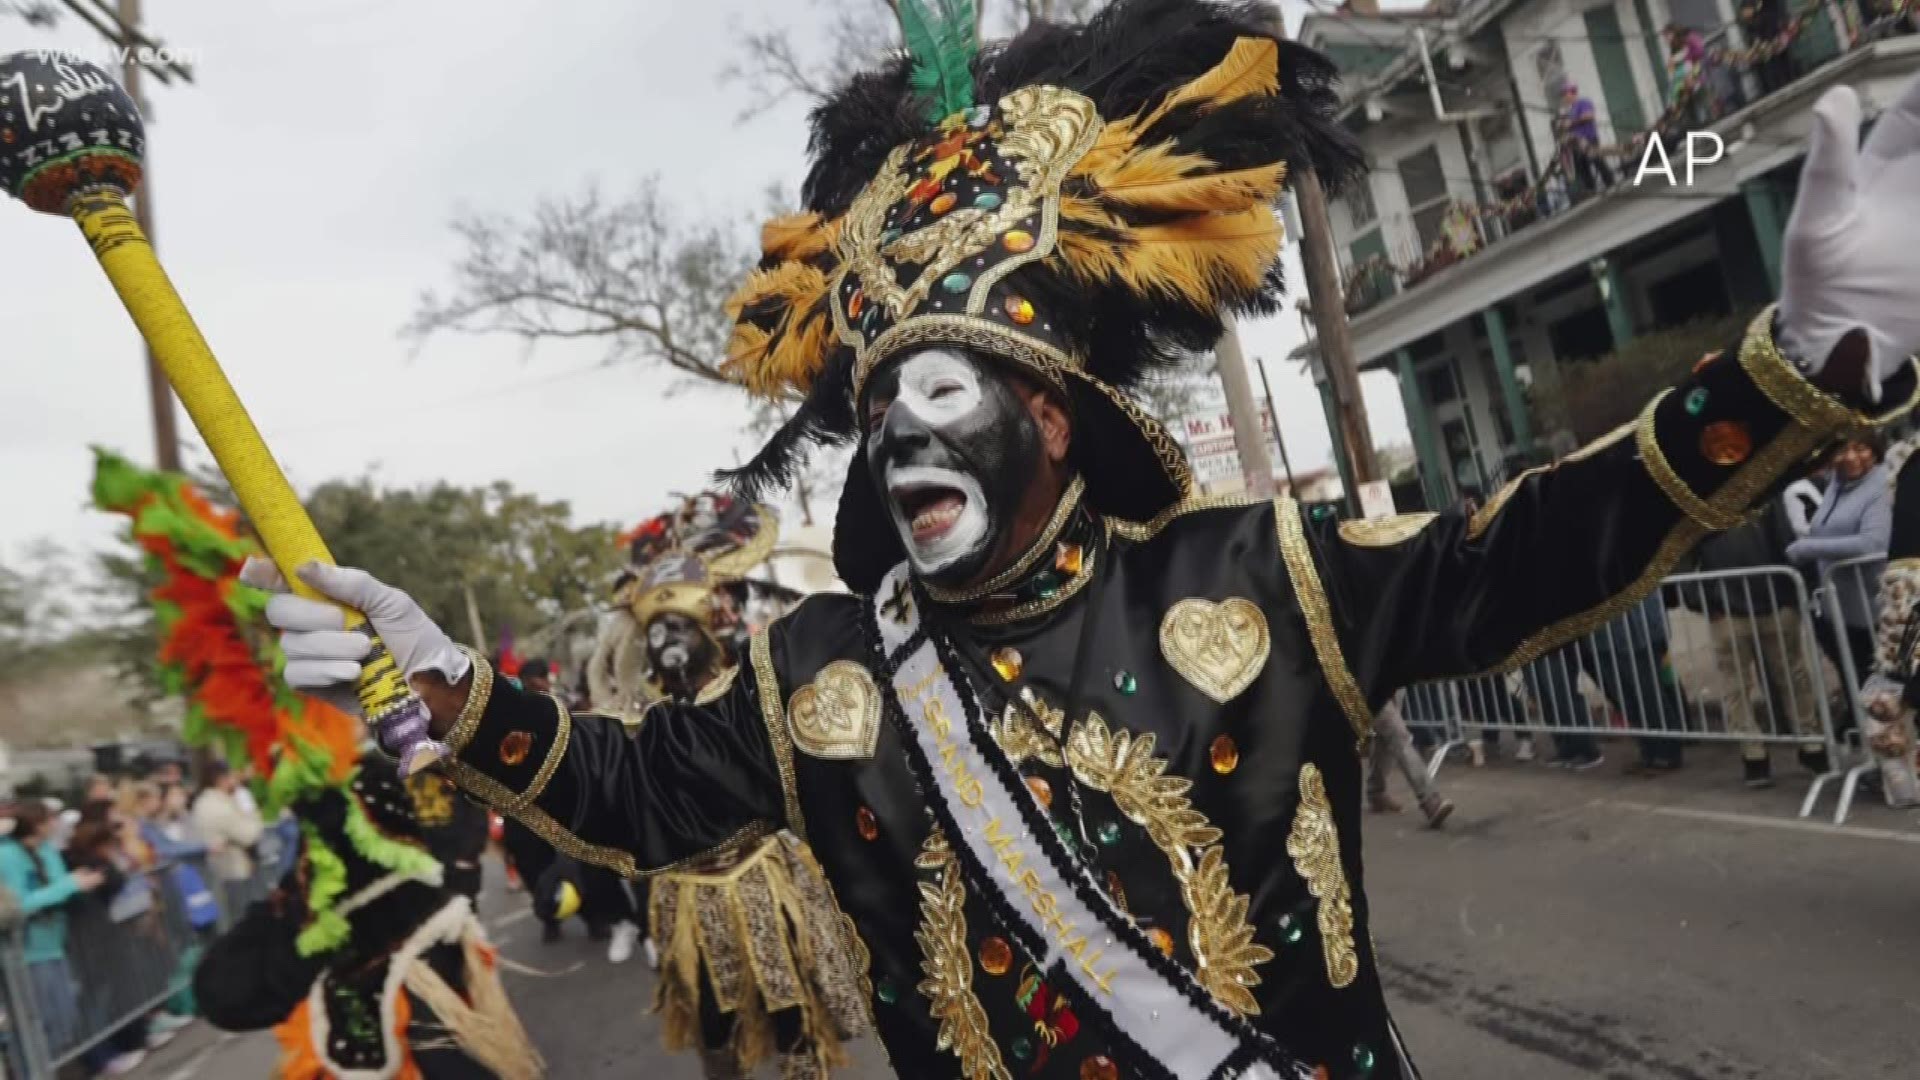 Take Em Down NOLA is demanding the change because they say the makeup reinforces racist stereotypes.